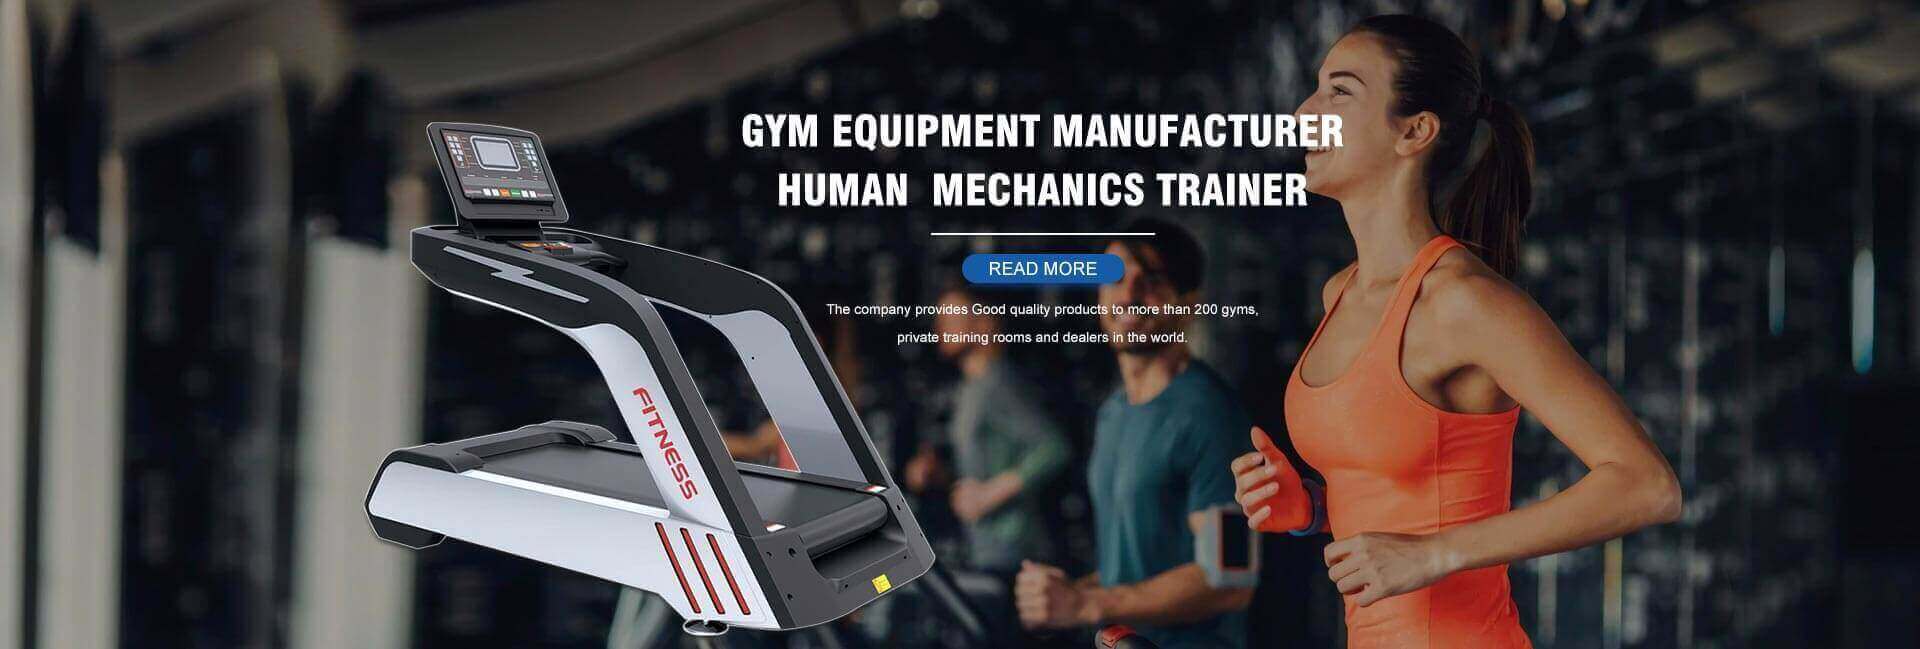 commercial treadmill manufacture